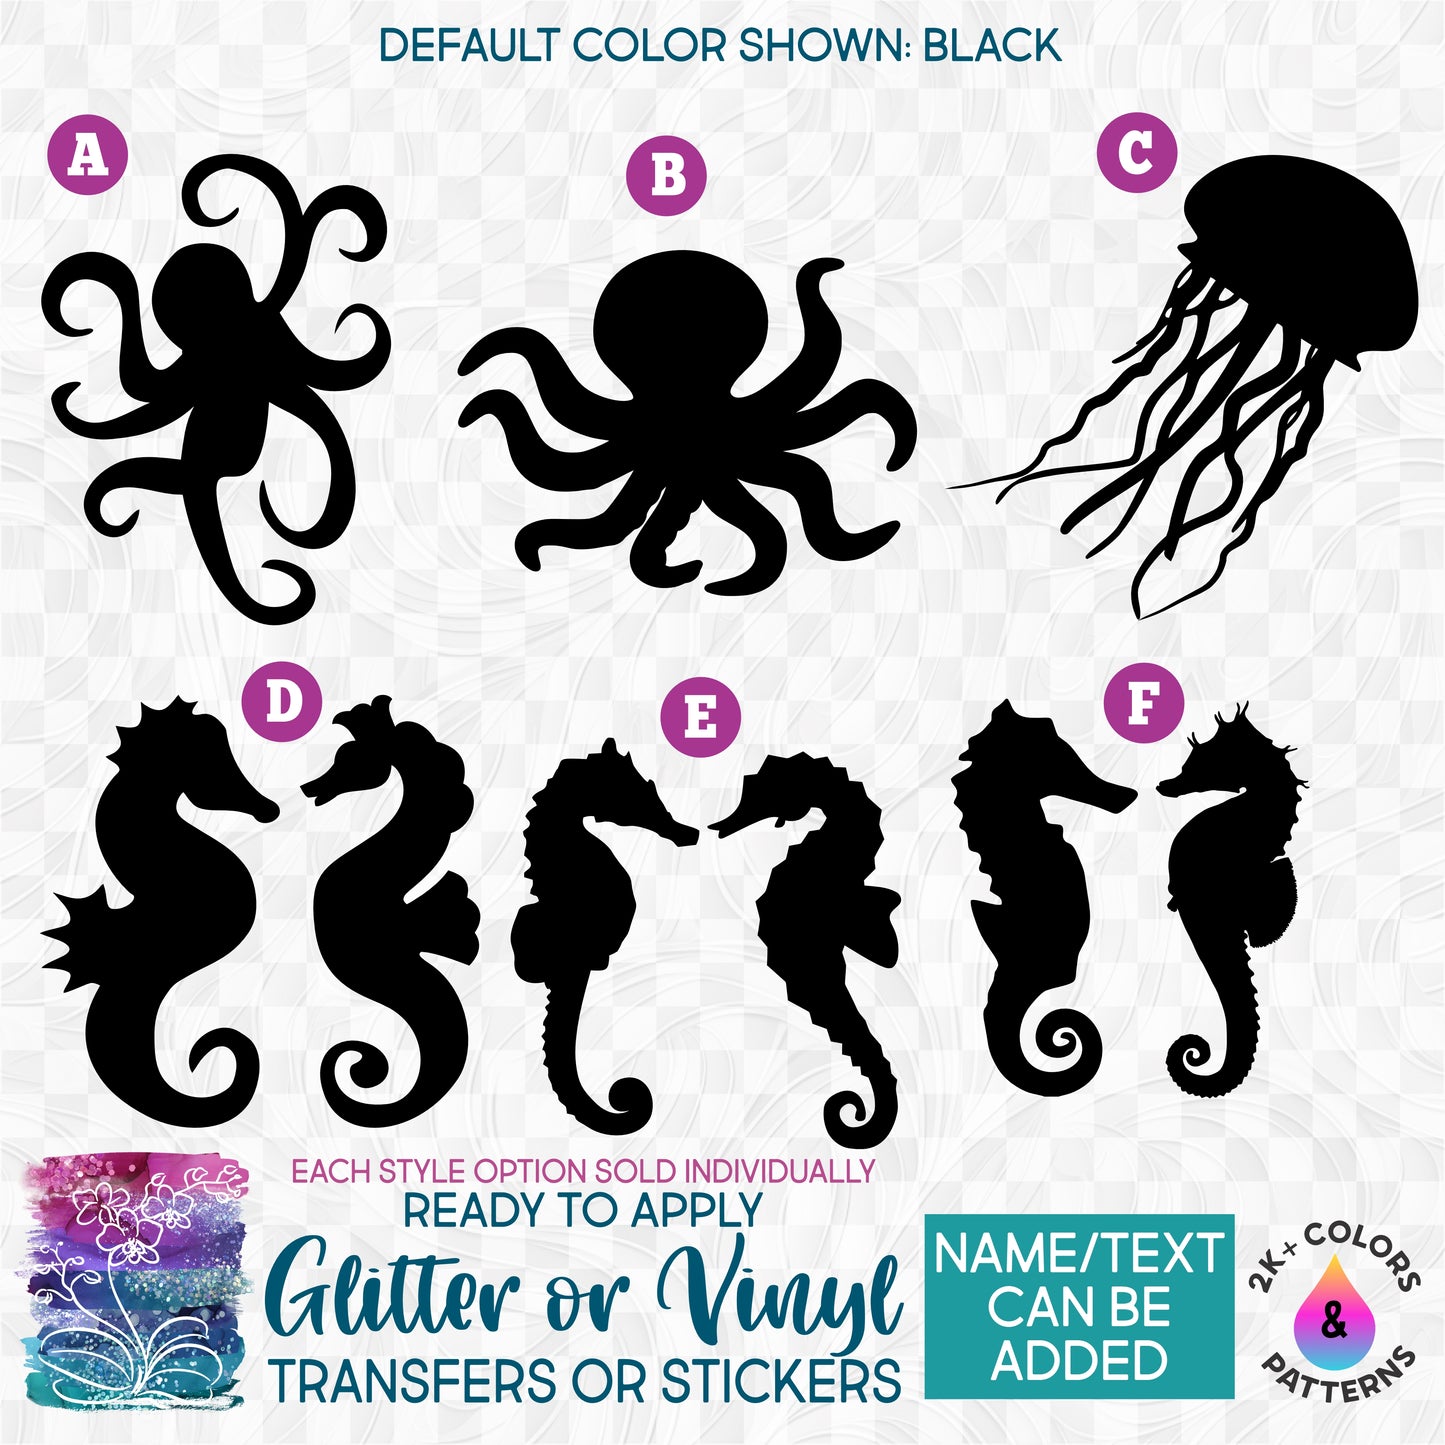 SBS-92 Octopus Seahorse Jellyfish Made-to-Order Iron-On Transfer or Sticker